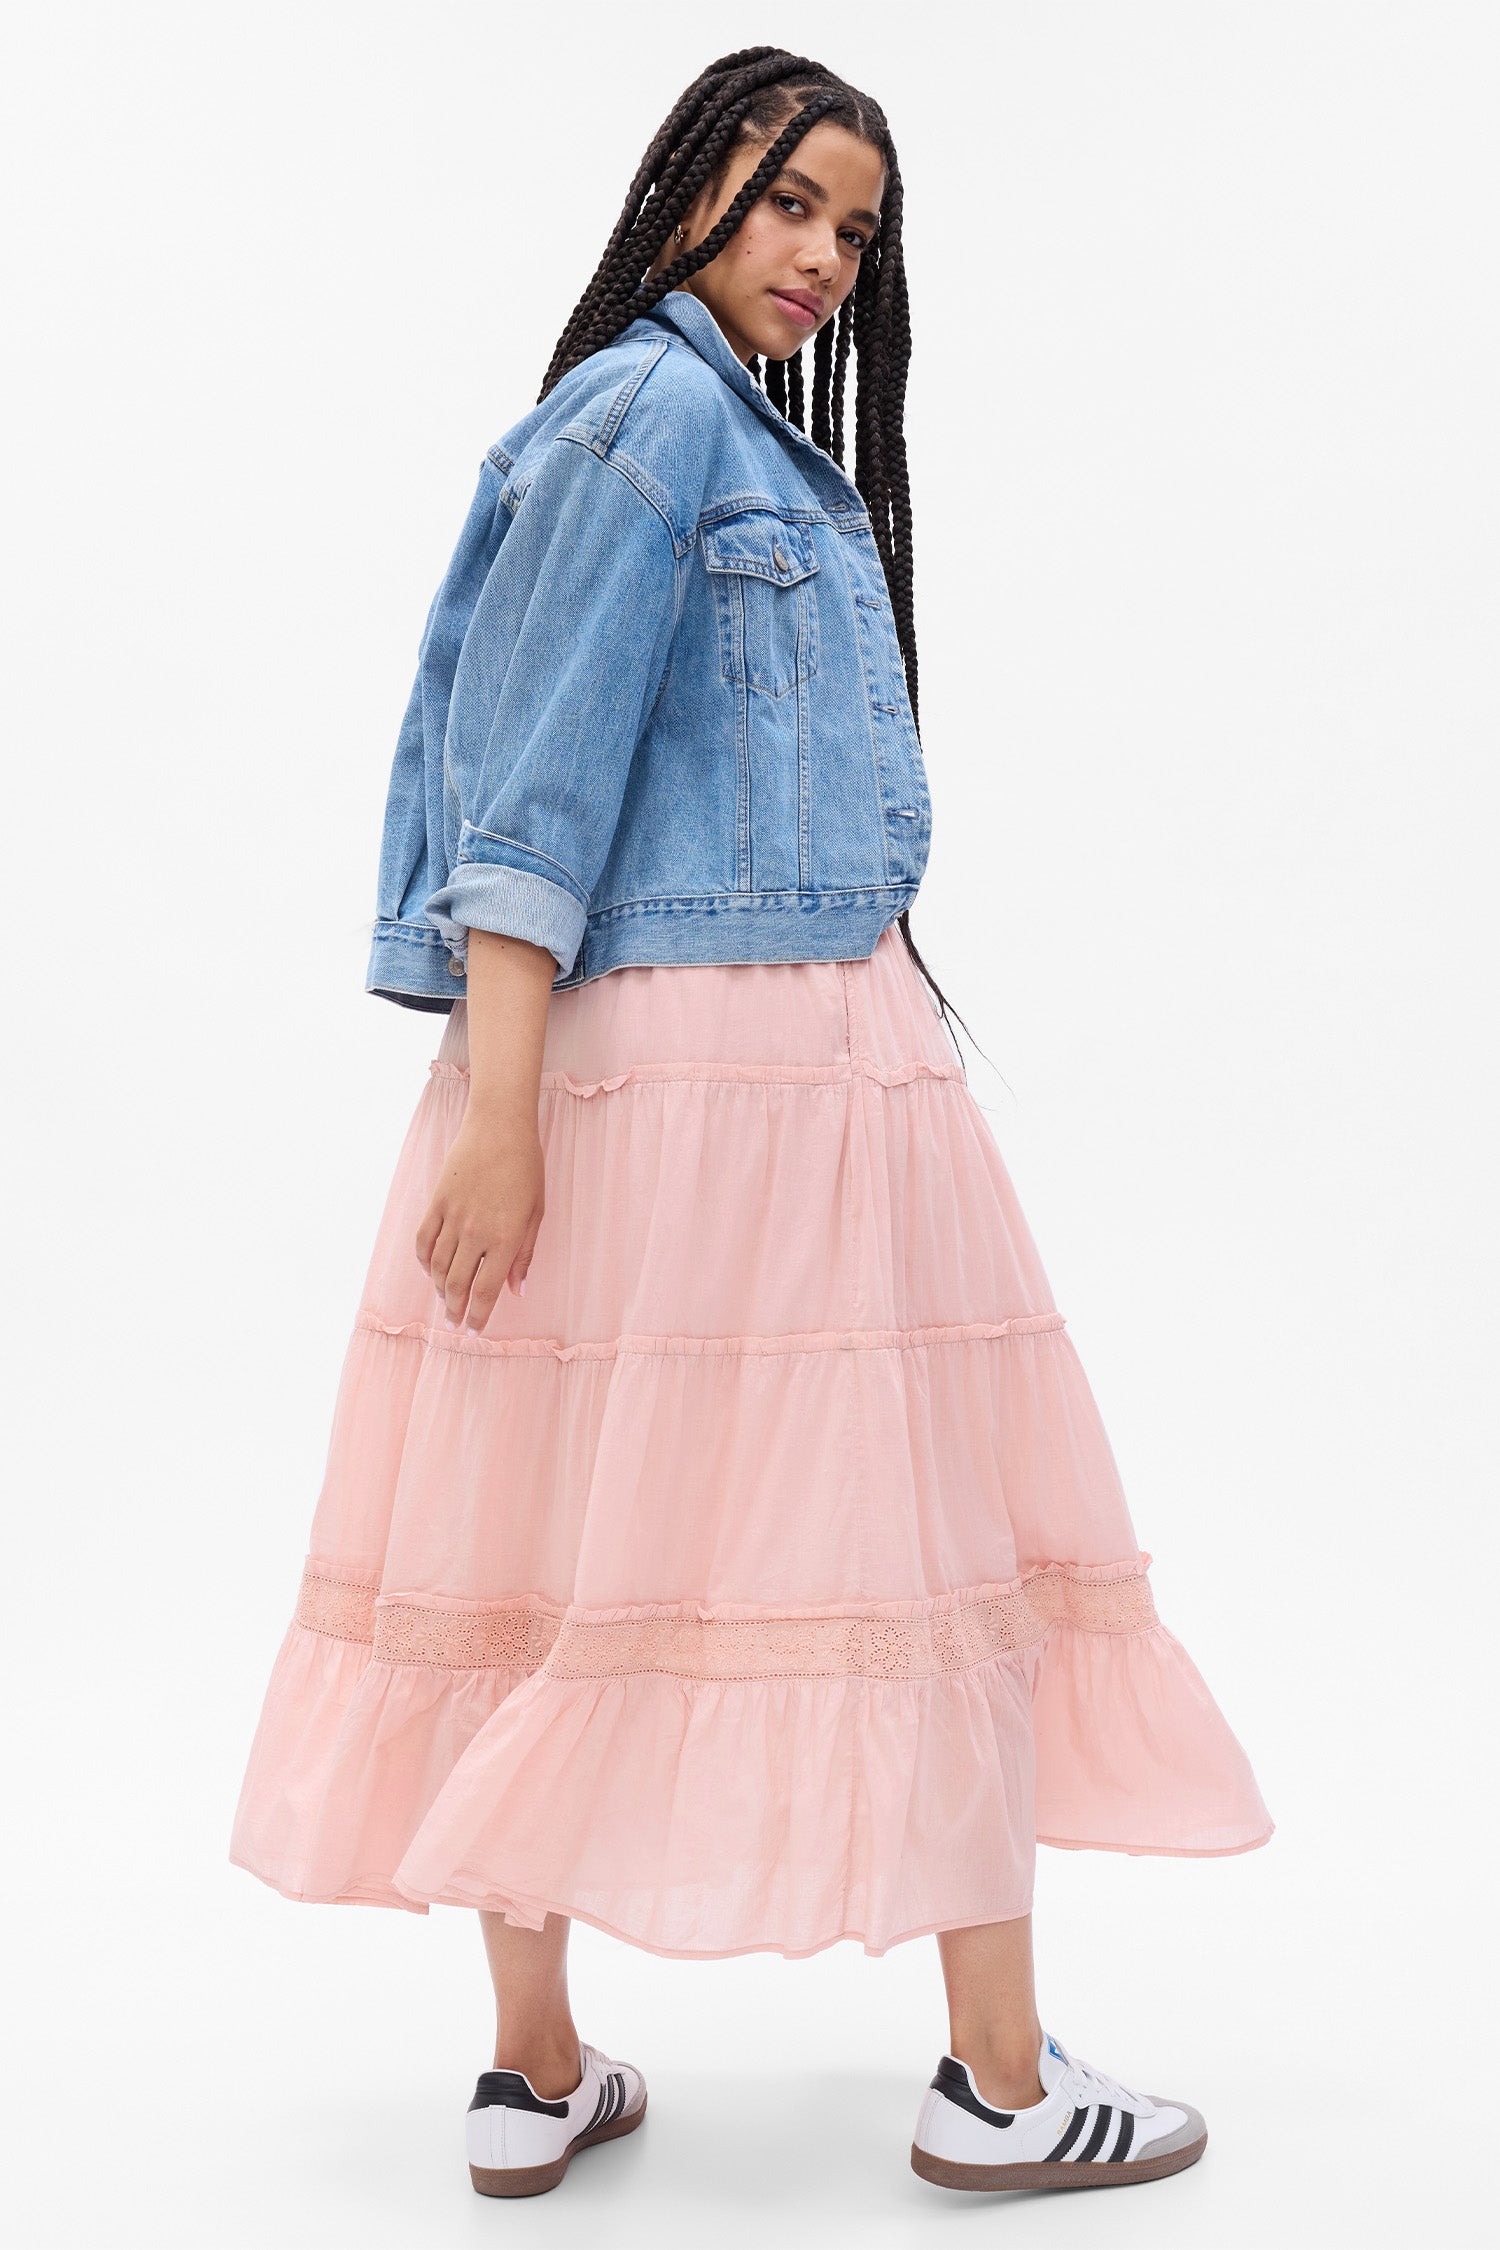 Back image of model wearing pink tiered maxi skirt with eyelet detail